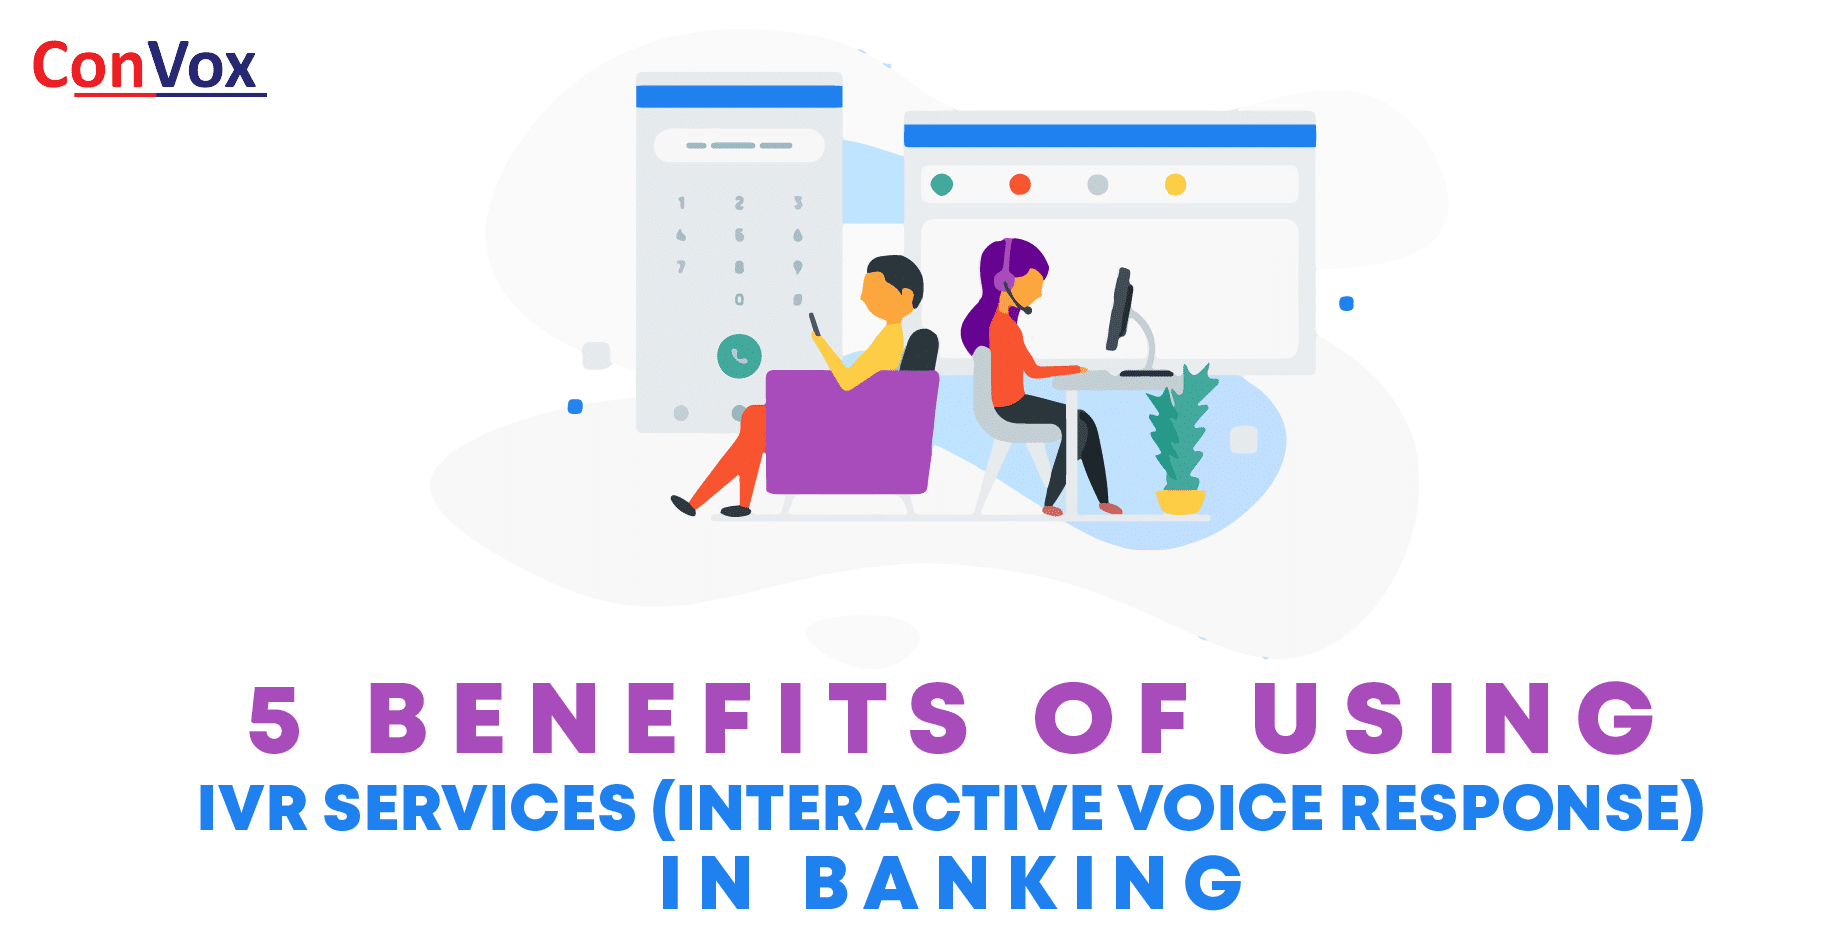 5 Benefits of using IVR Services (Interactive Voice Response) in Banking